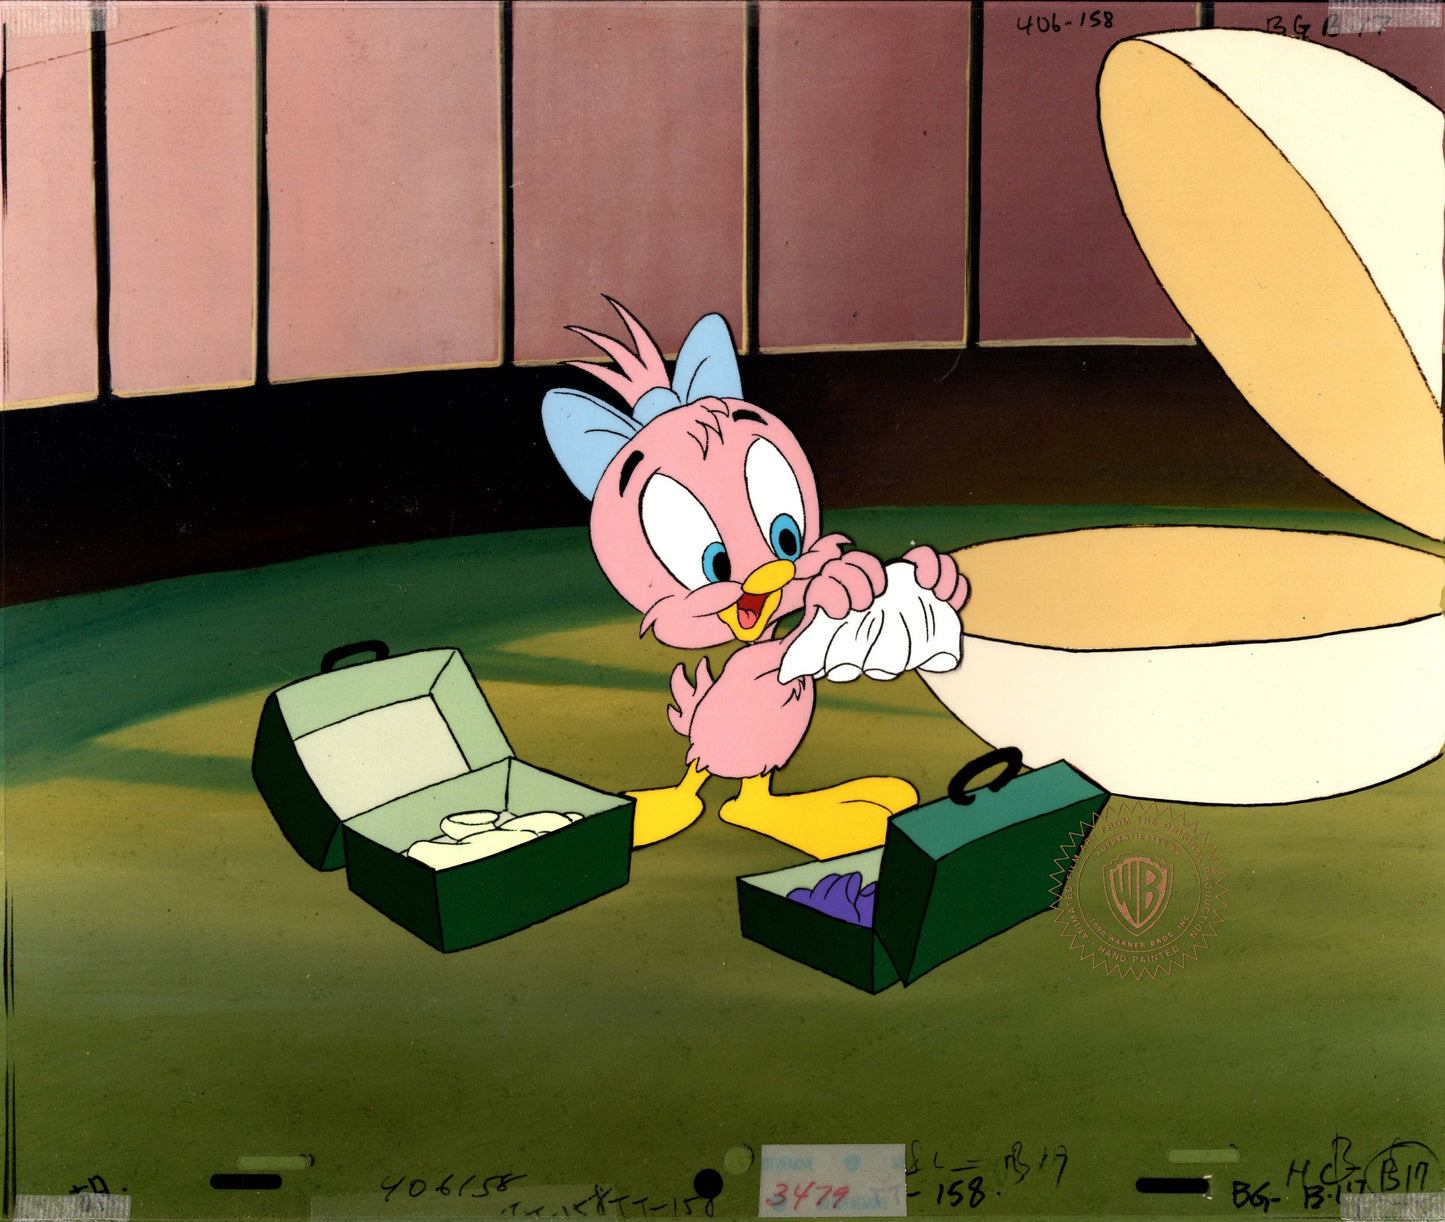 Tiny Toons Original Production Animation Cel Sweetie Bird 1990-92 Spielberg with WB Seal and COA 17